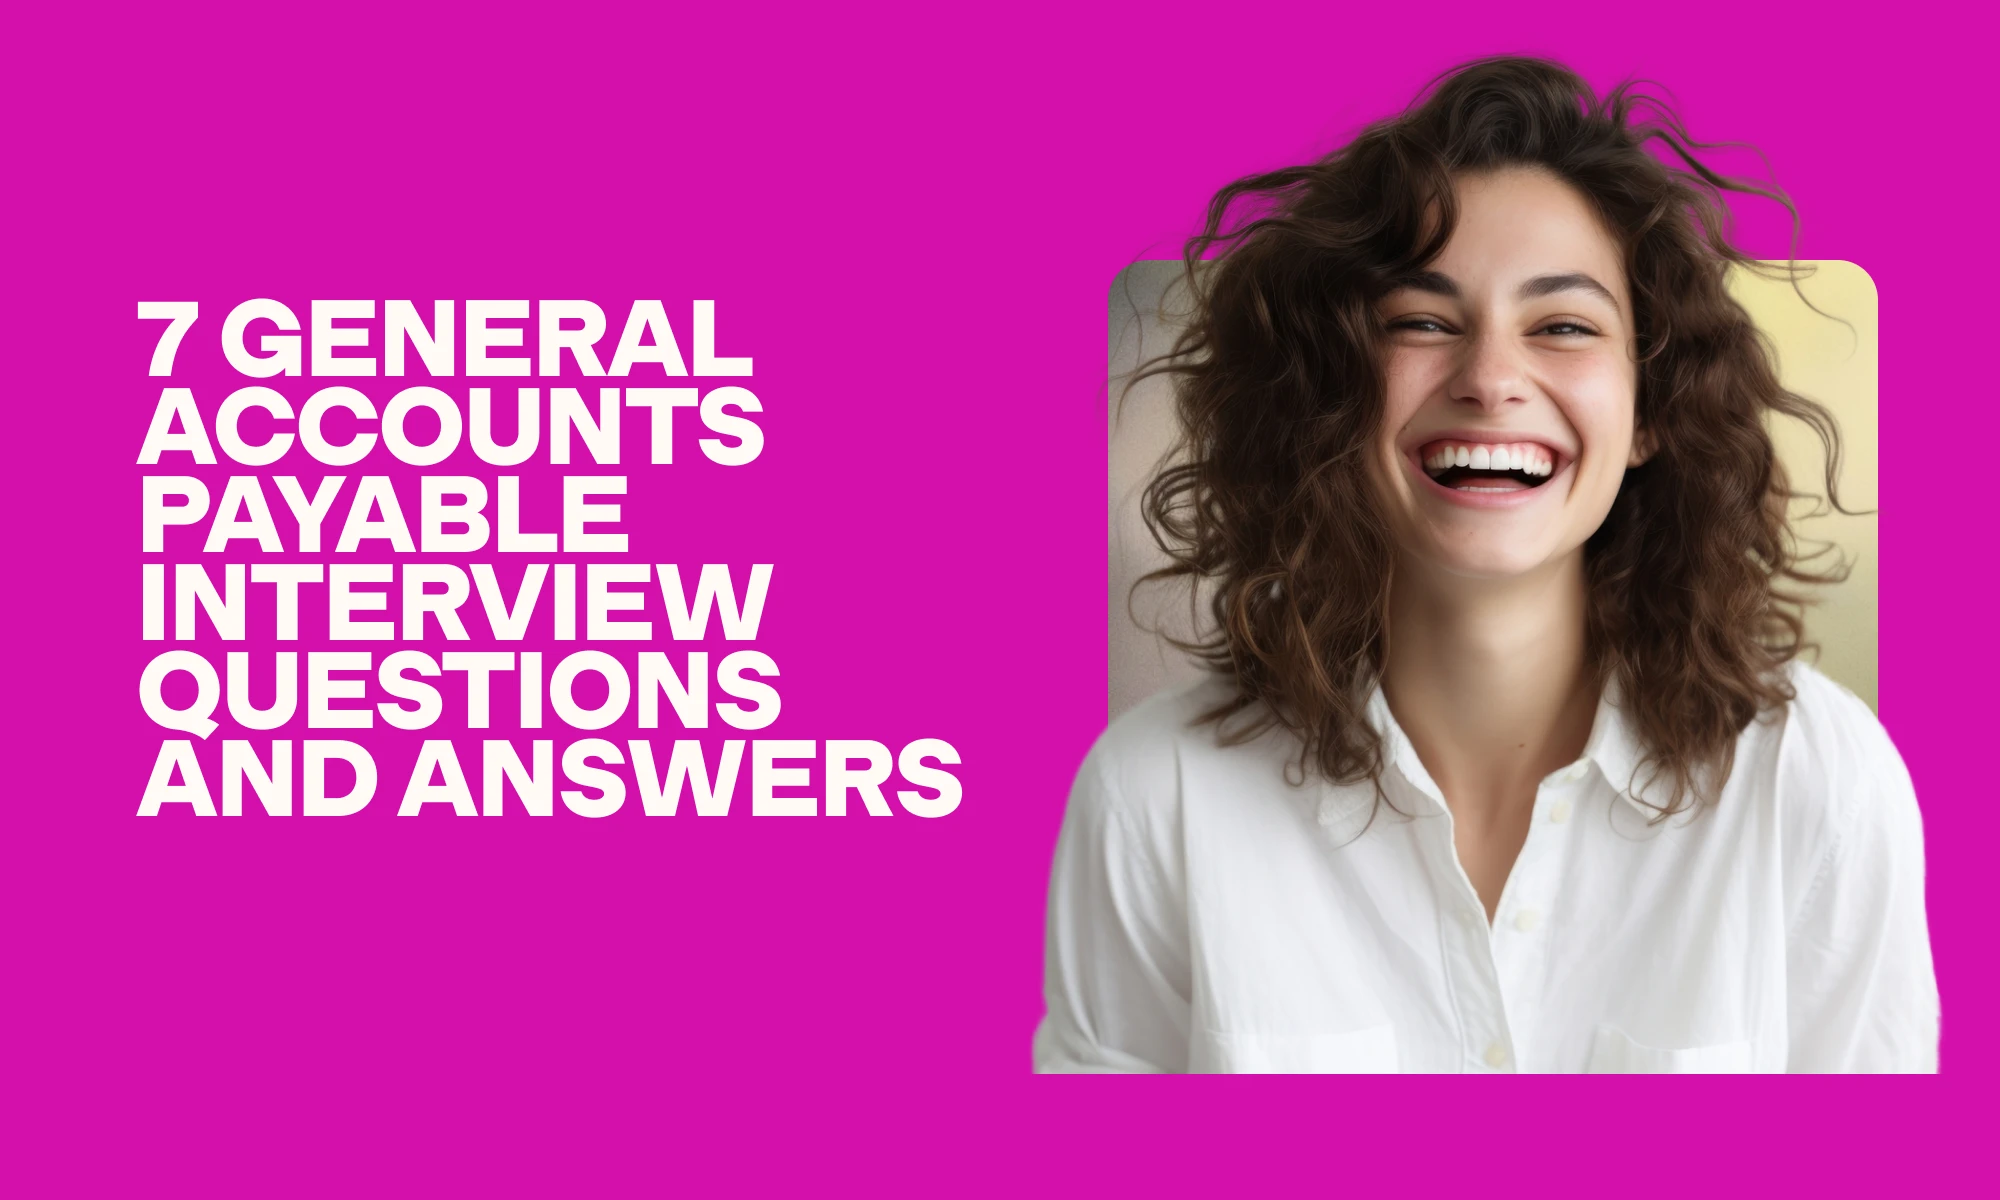 general accounts payable interview questions graphic